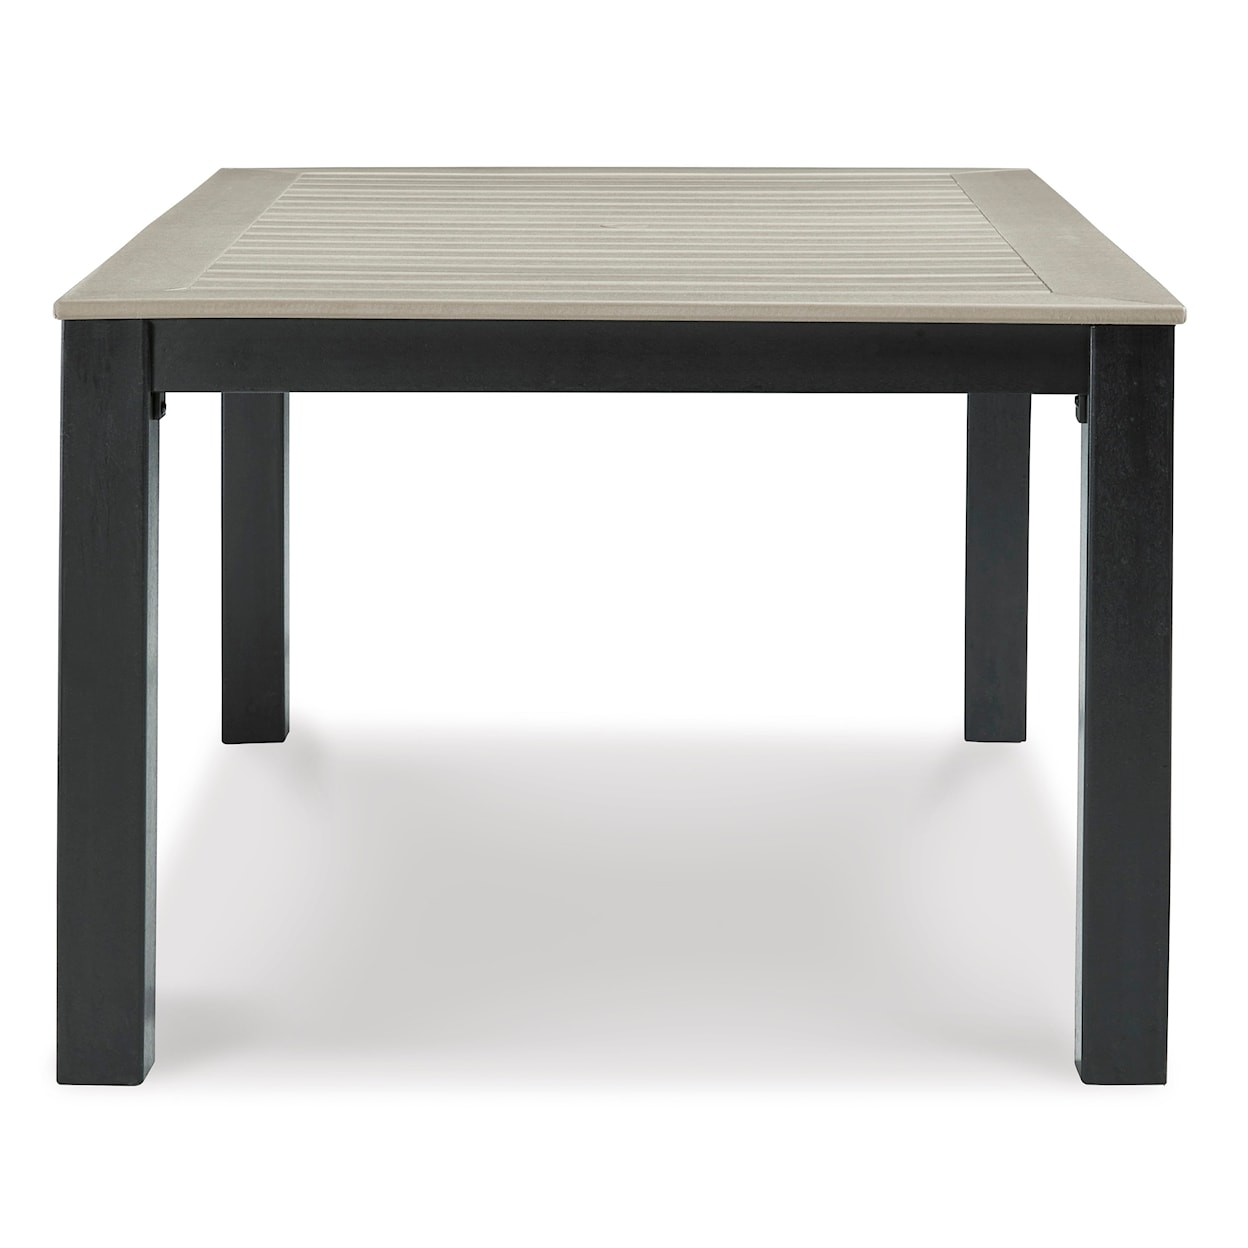 Michael Alan Select Mount Valley Outdoor Dining Table